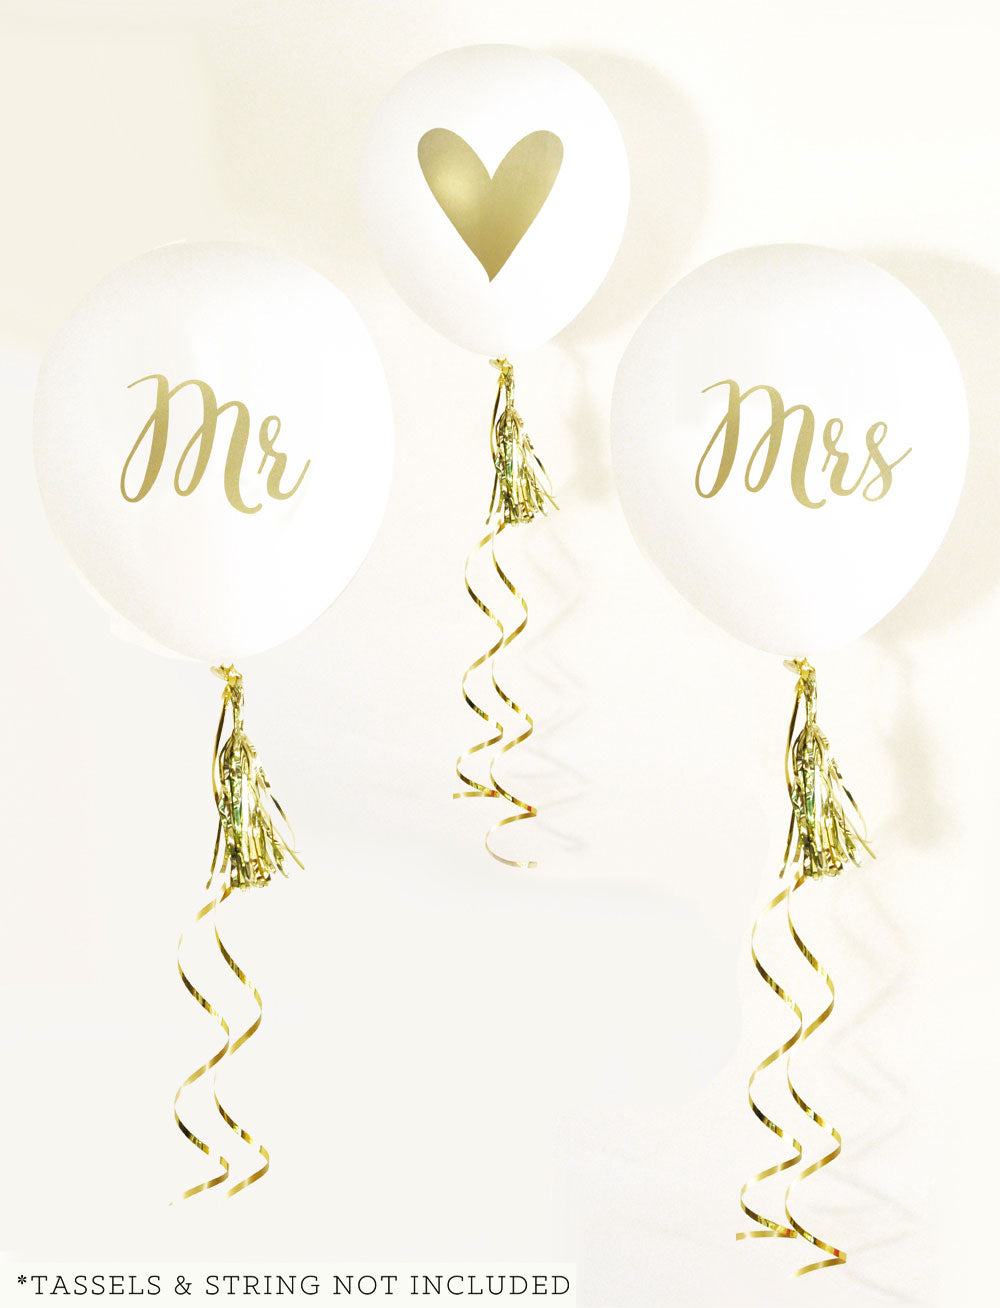 Mr and Mrs Party Balloons Set of 3 Gold Printed Wedding Balloons